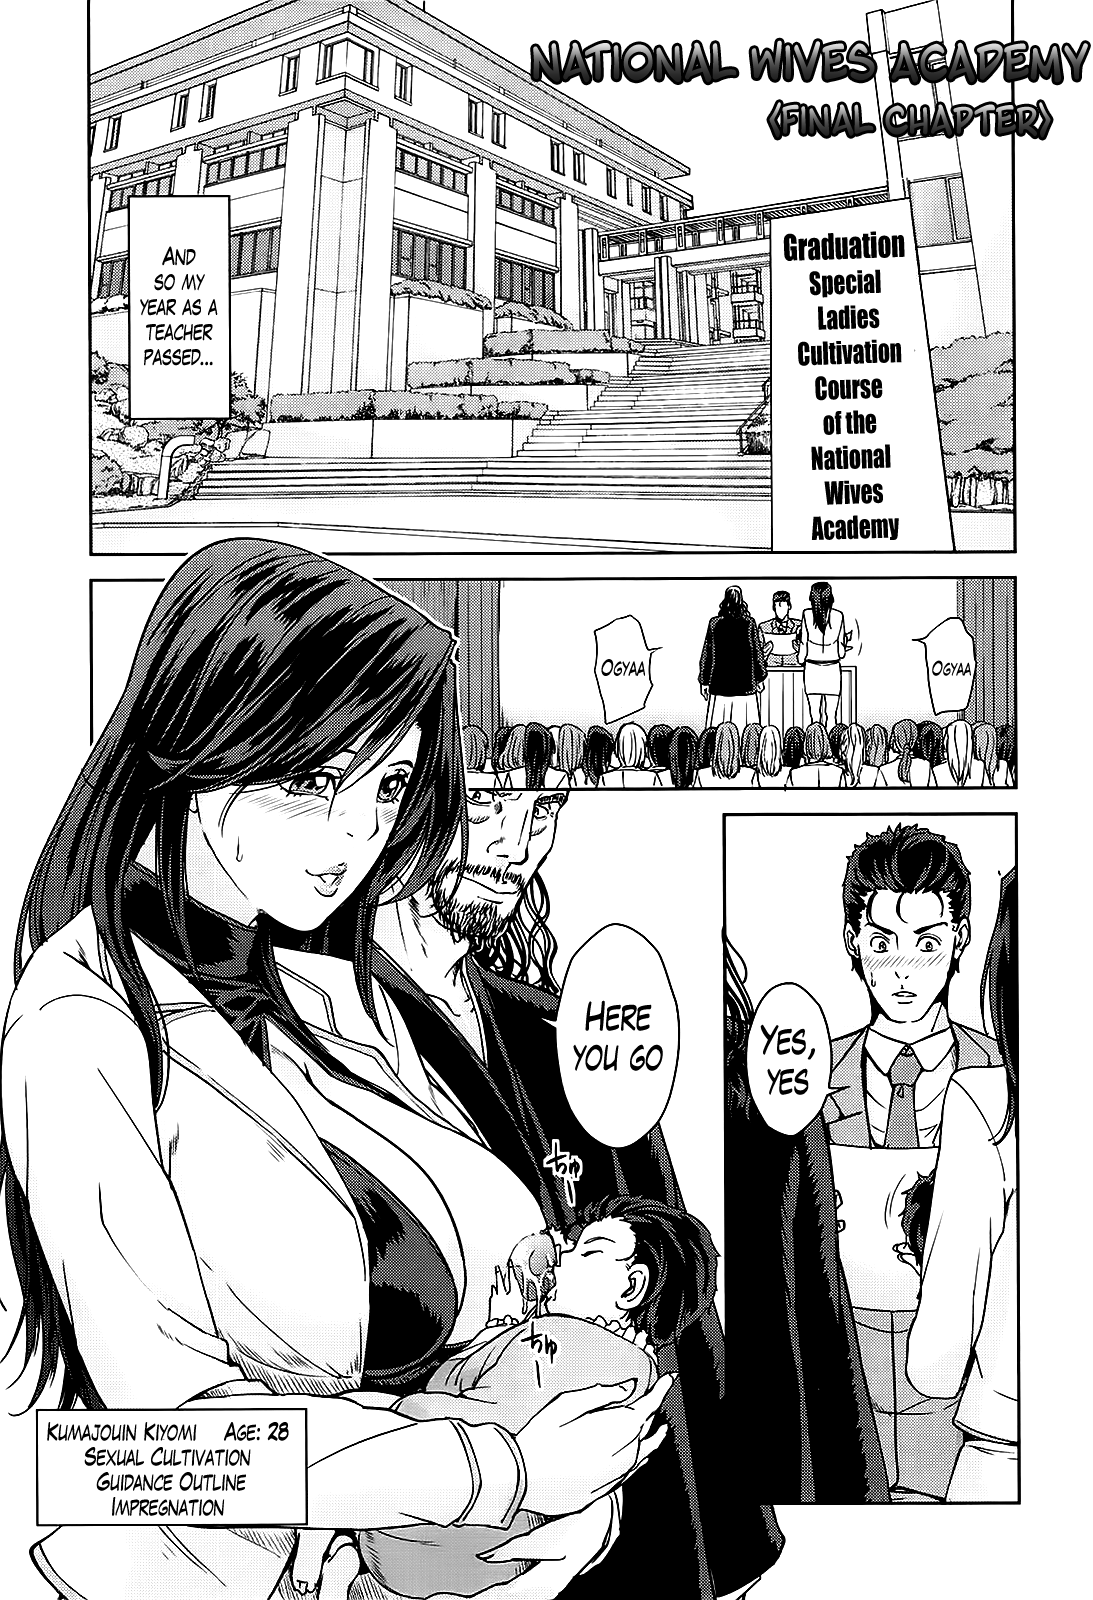 National Married Academy Vol.1 Chapter 4: National Wives Academy 4 - Picture 1